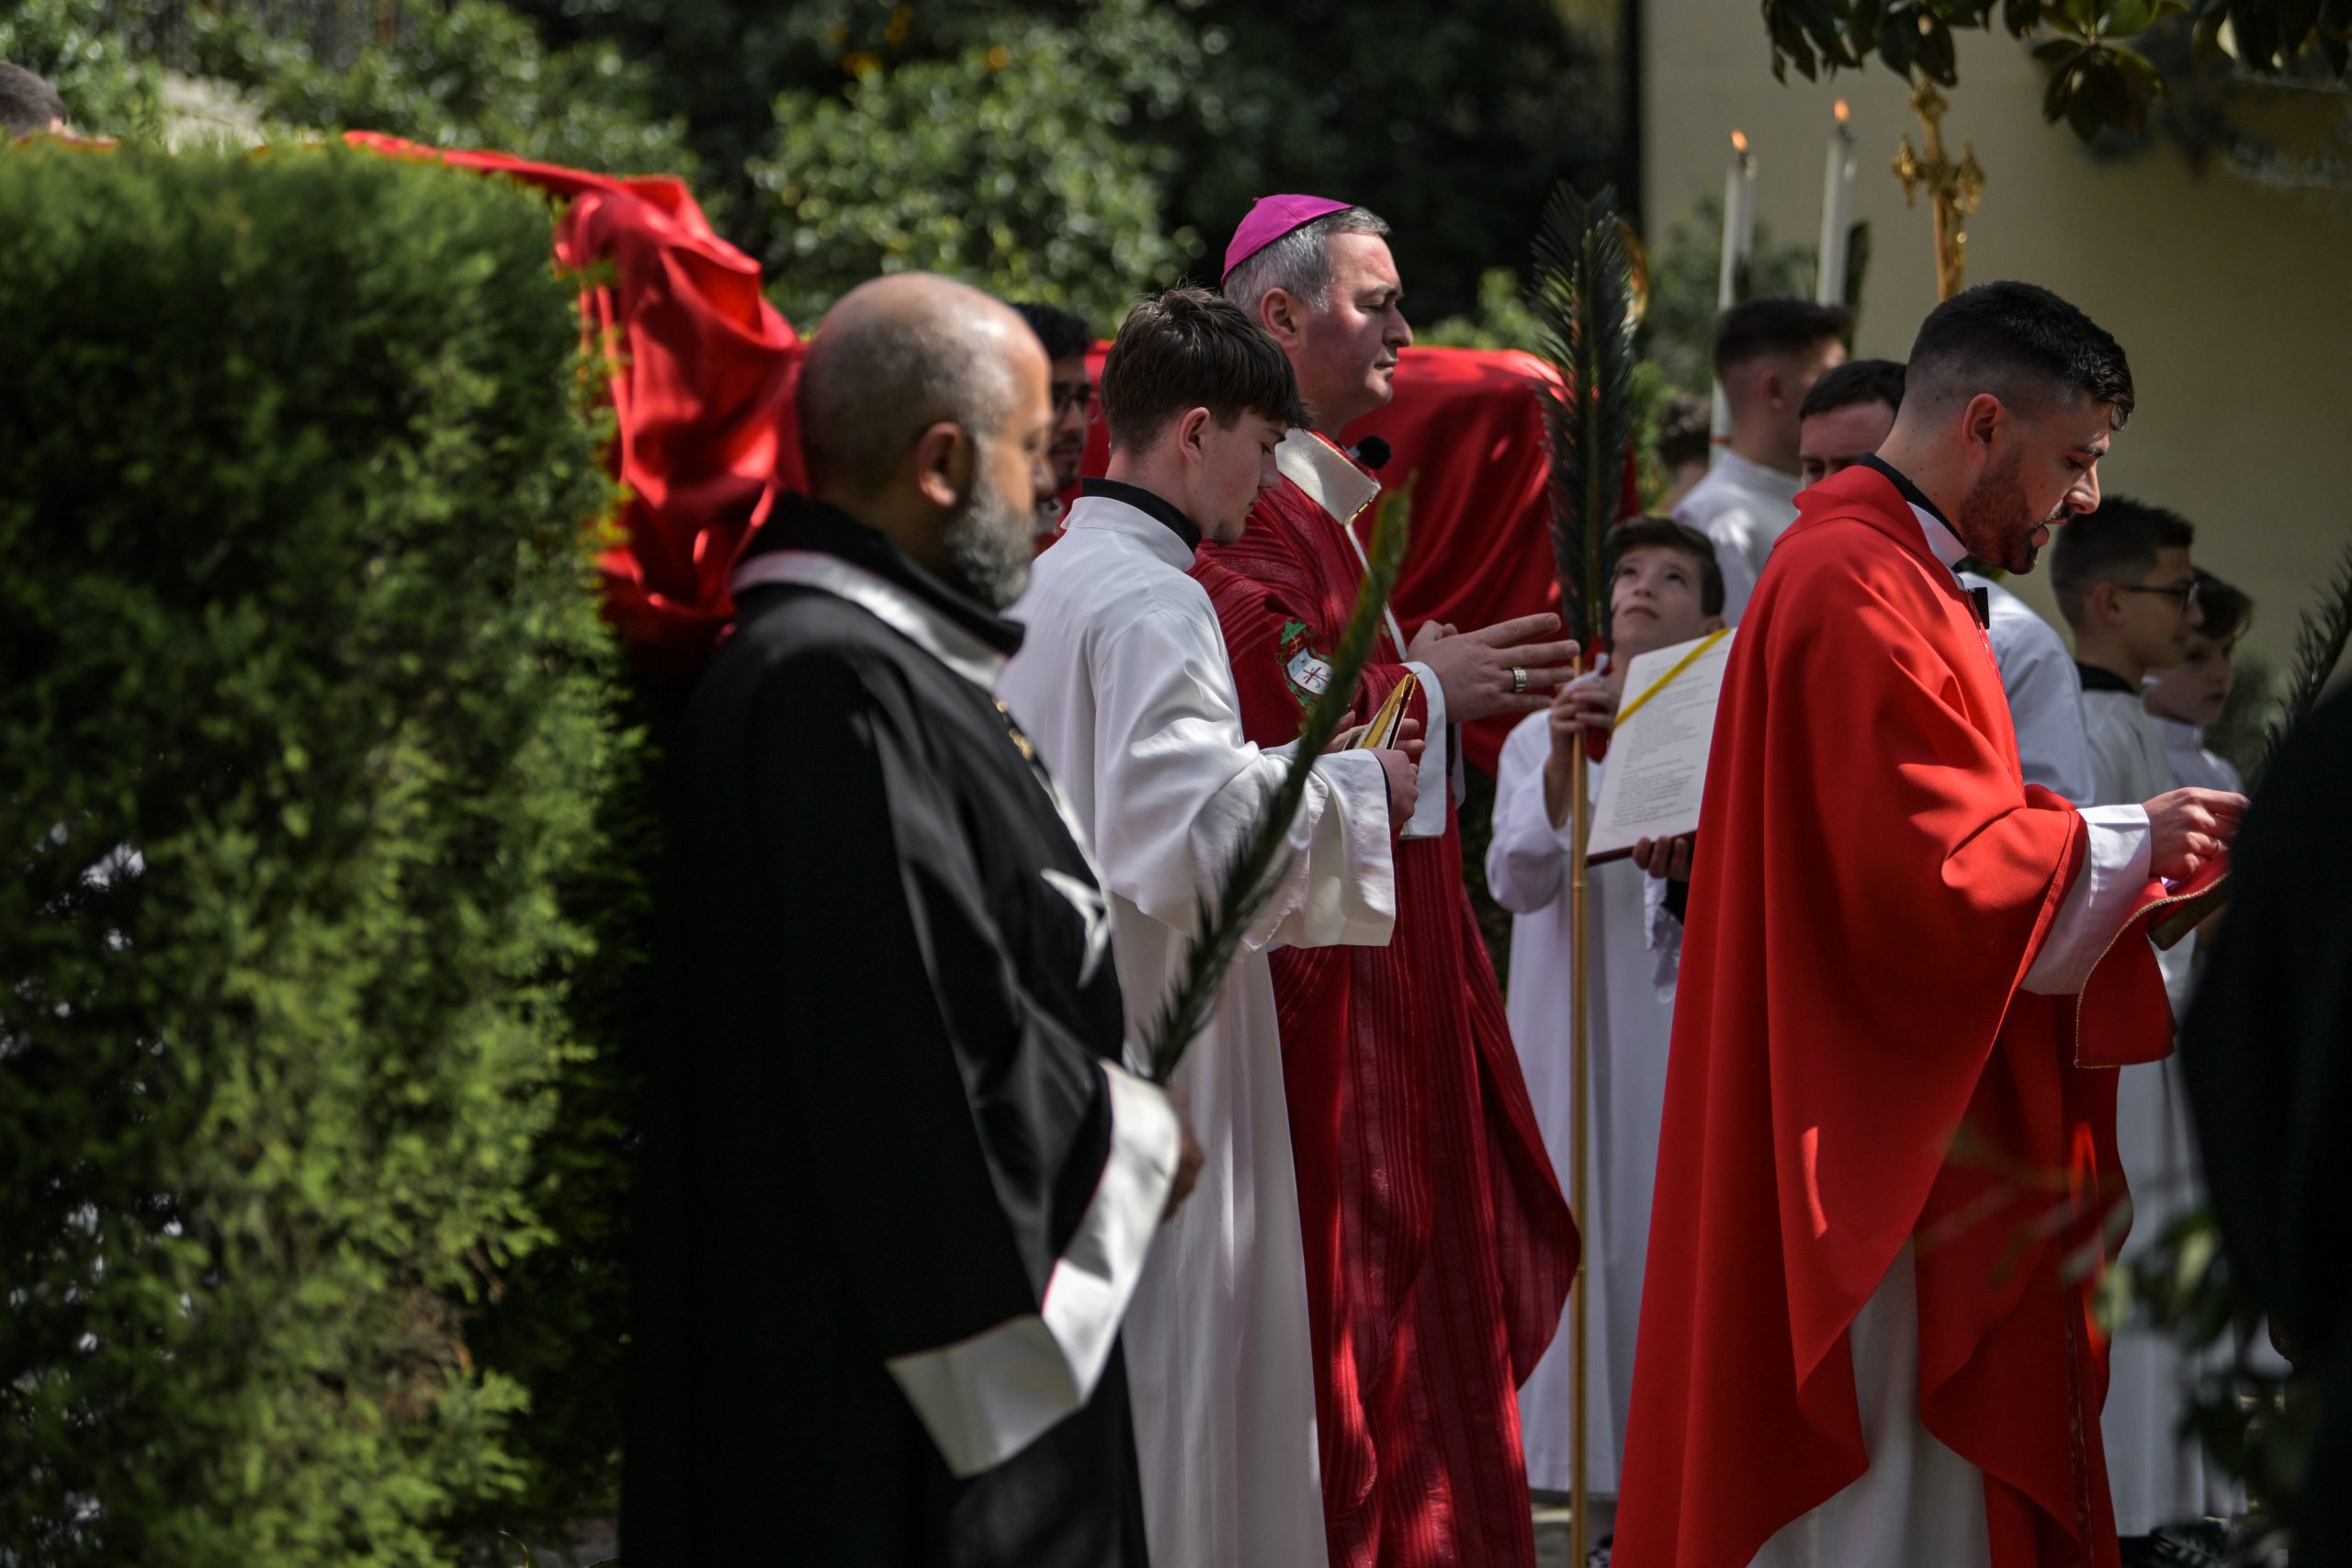 Palm Sunday Solemnity in Tirana Cathedral celebrated by Archbishop Arjan Dodaj, Archbishop of Tiranë-Durrës and Honorary Conventual Chaplain of the Sovereign Military Order of Malta